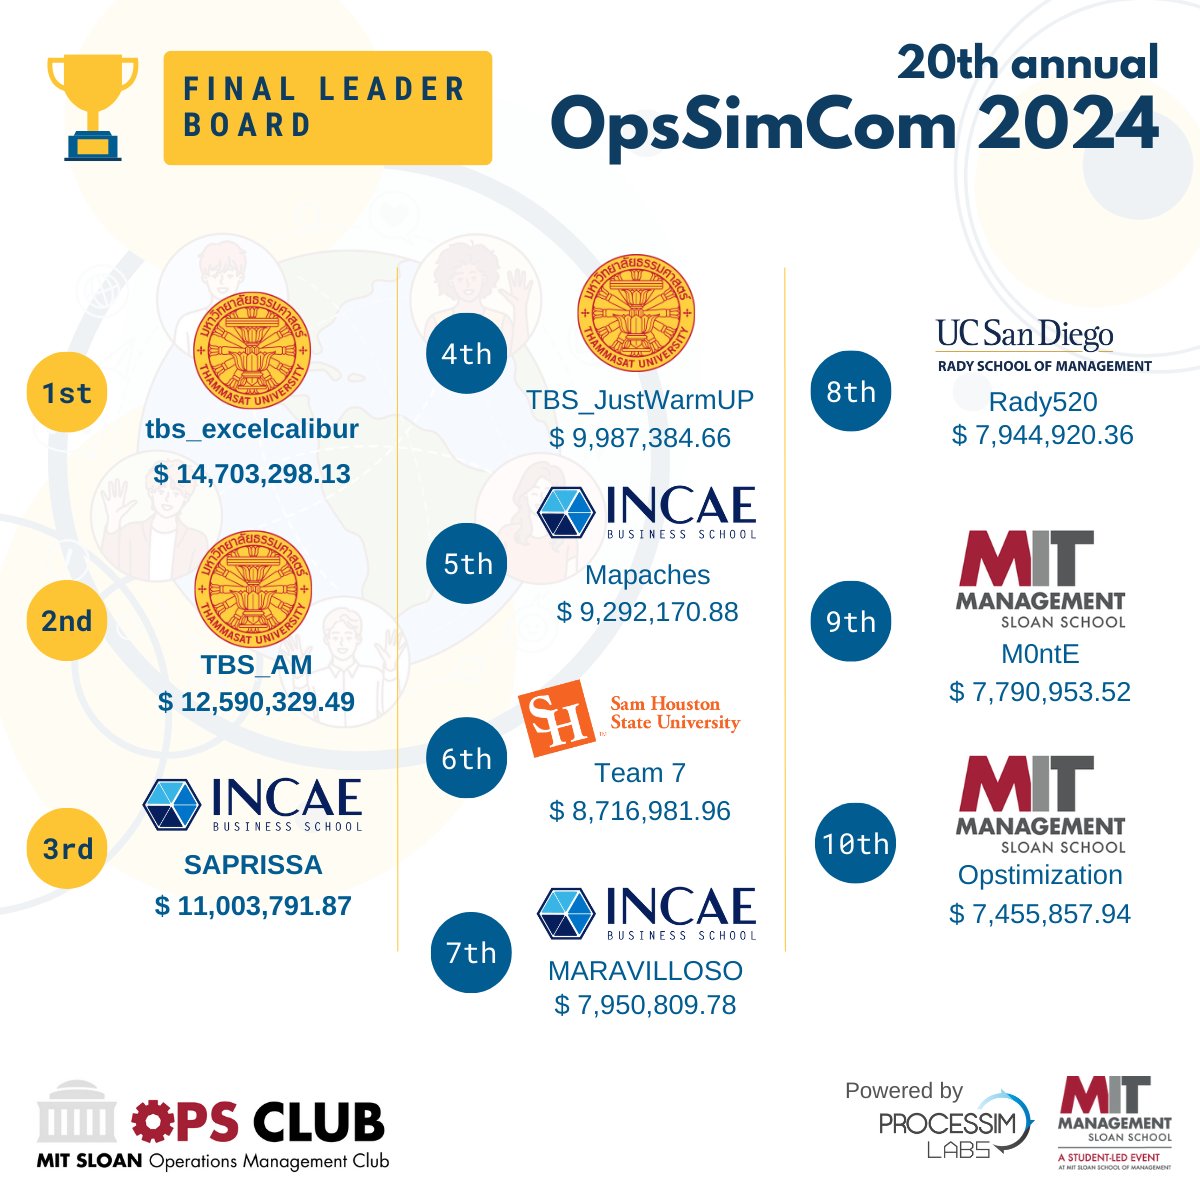 🏆 Congrats to the #OpsSimCom2024 winners!
 
@thammasat_uni  clinches 1st & 2nd, marking their 3rd win.

@INCAE completes the Top3.

Kudos to teams from @SamHoustonState, @RadySchool, & @MITSloan for making the #Top10. See you at OpsSimCom 2025!

#OpsSimCom #OperationsManagement